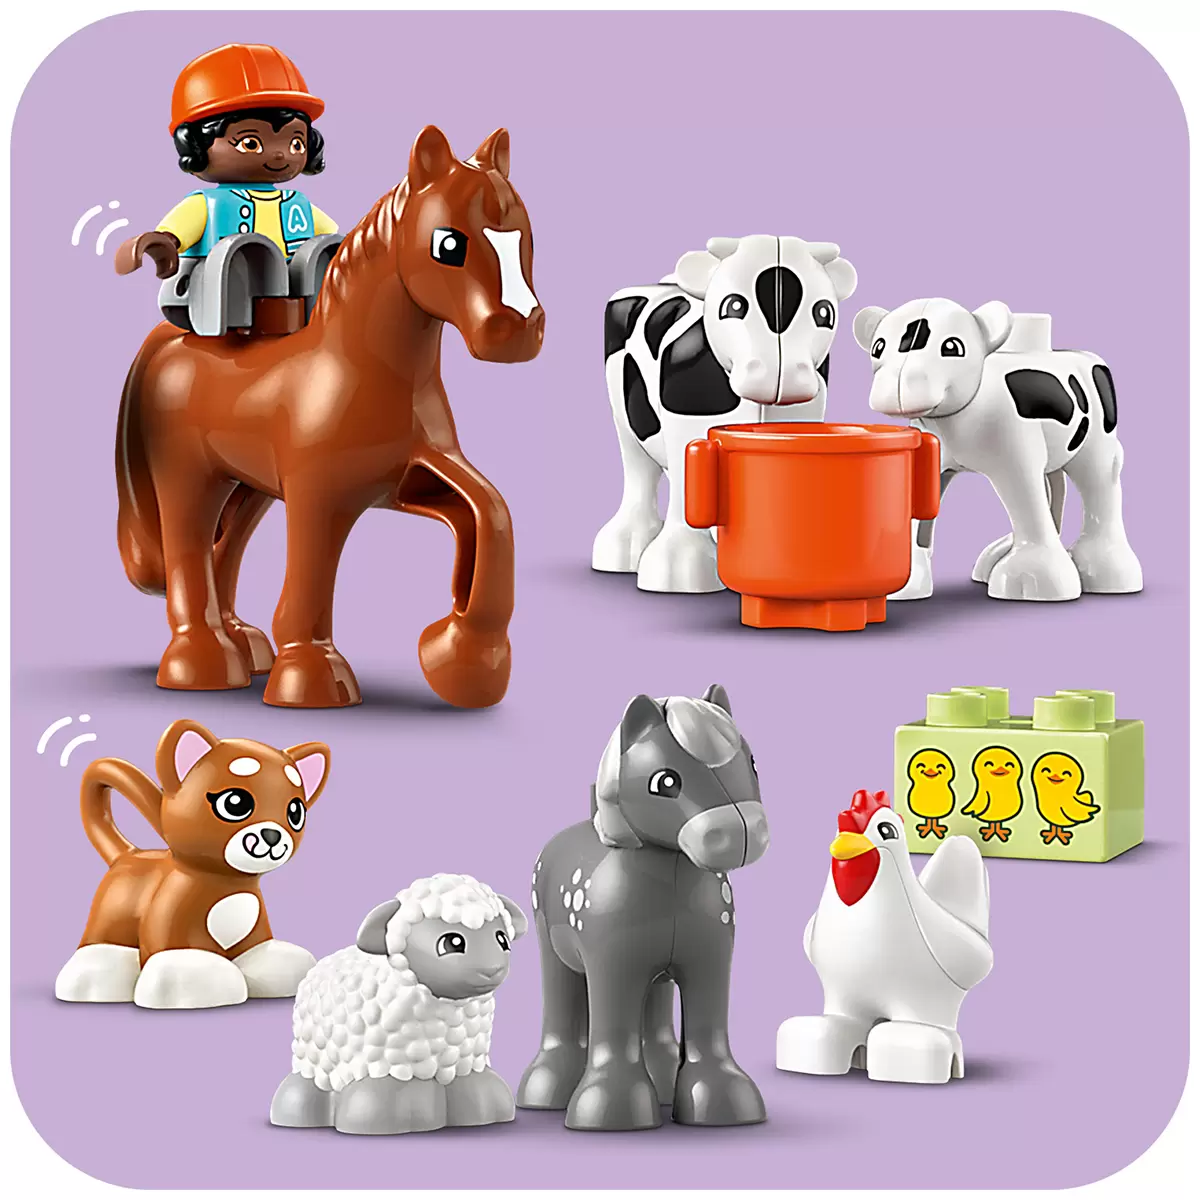 LEGO DUPLO Caring For Animals At The Farm 10416